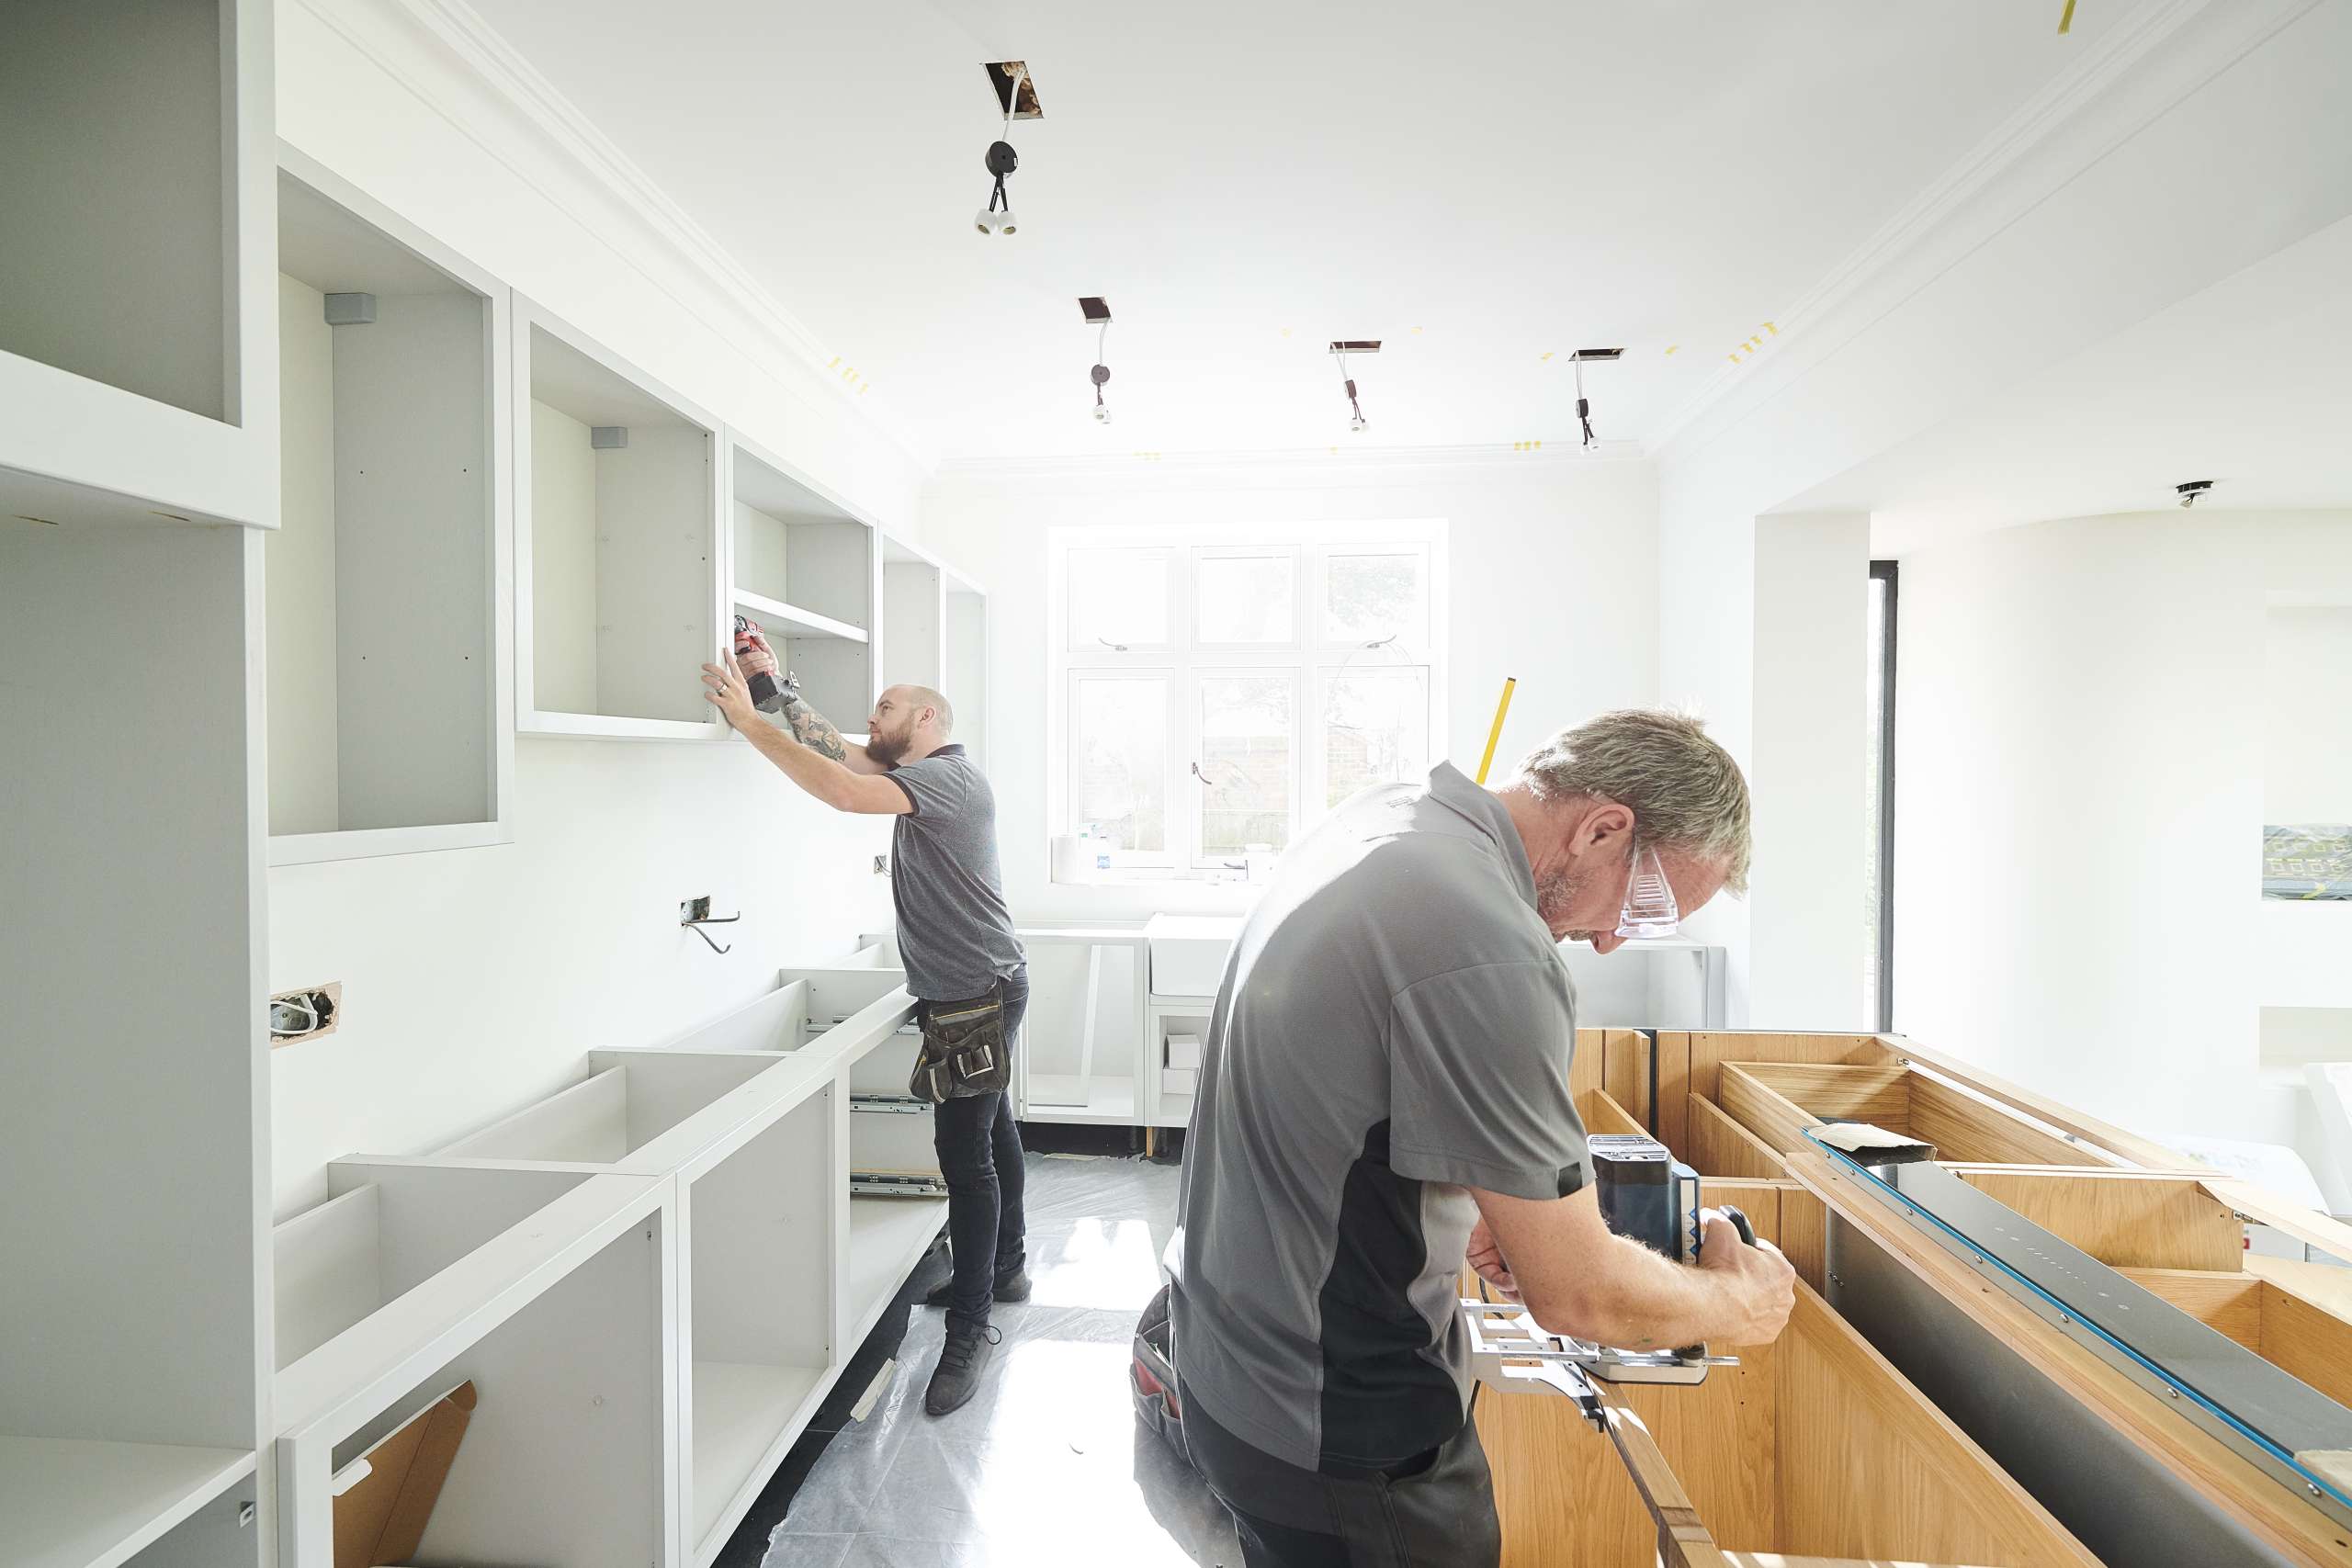 Two carpenters fitting a kitchen